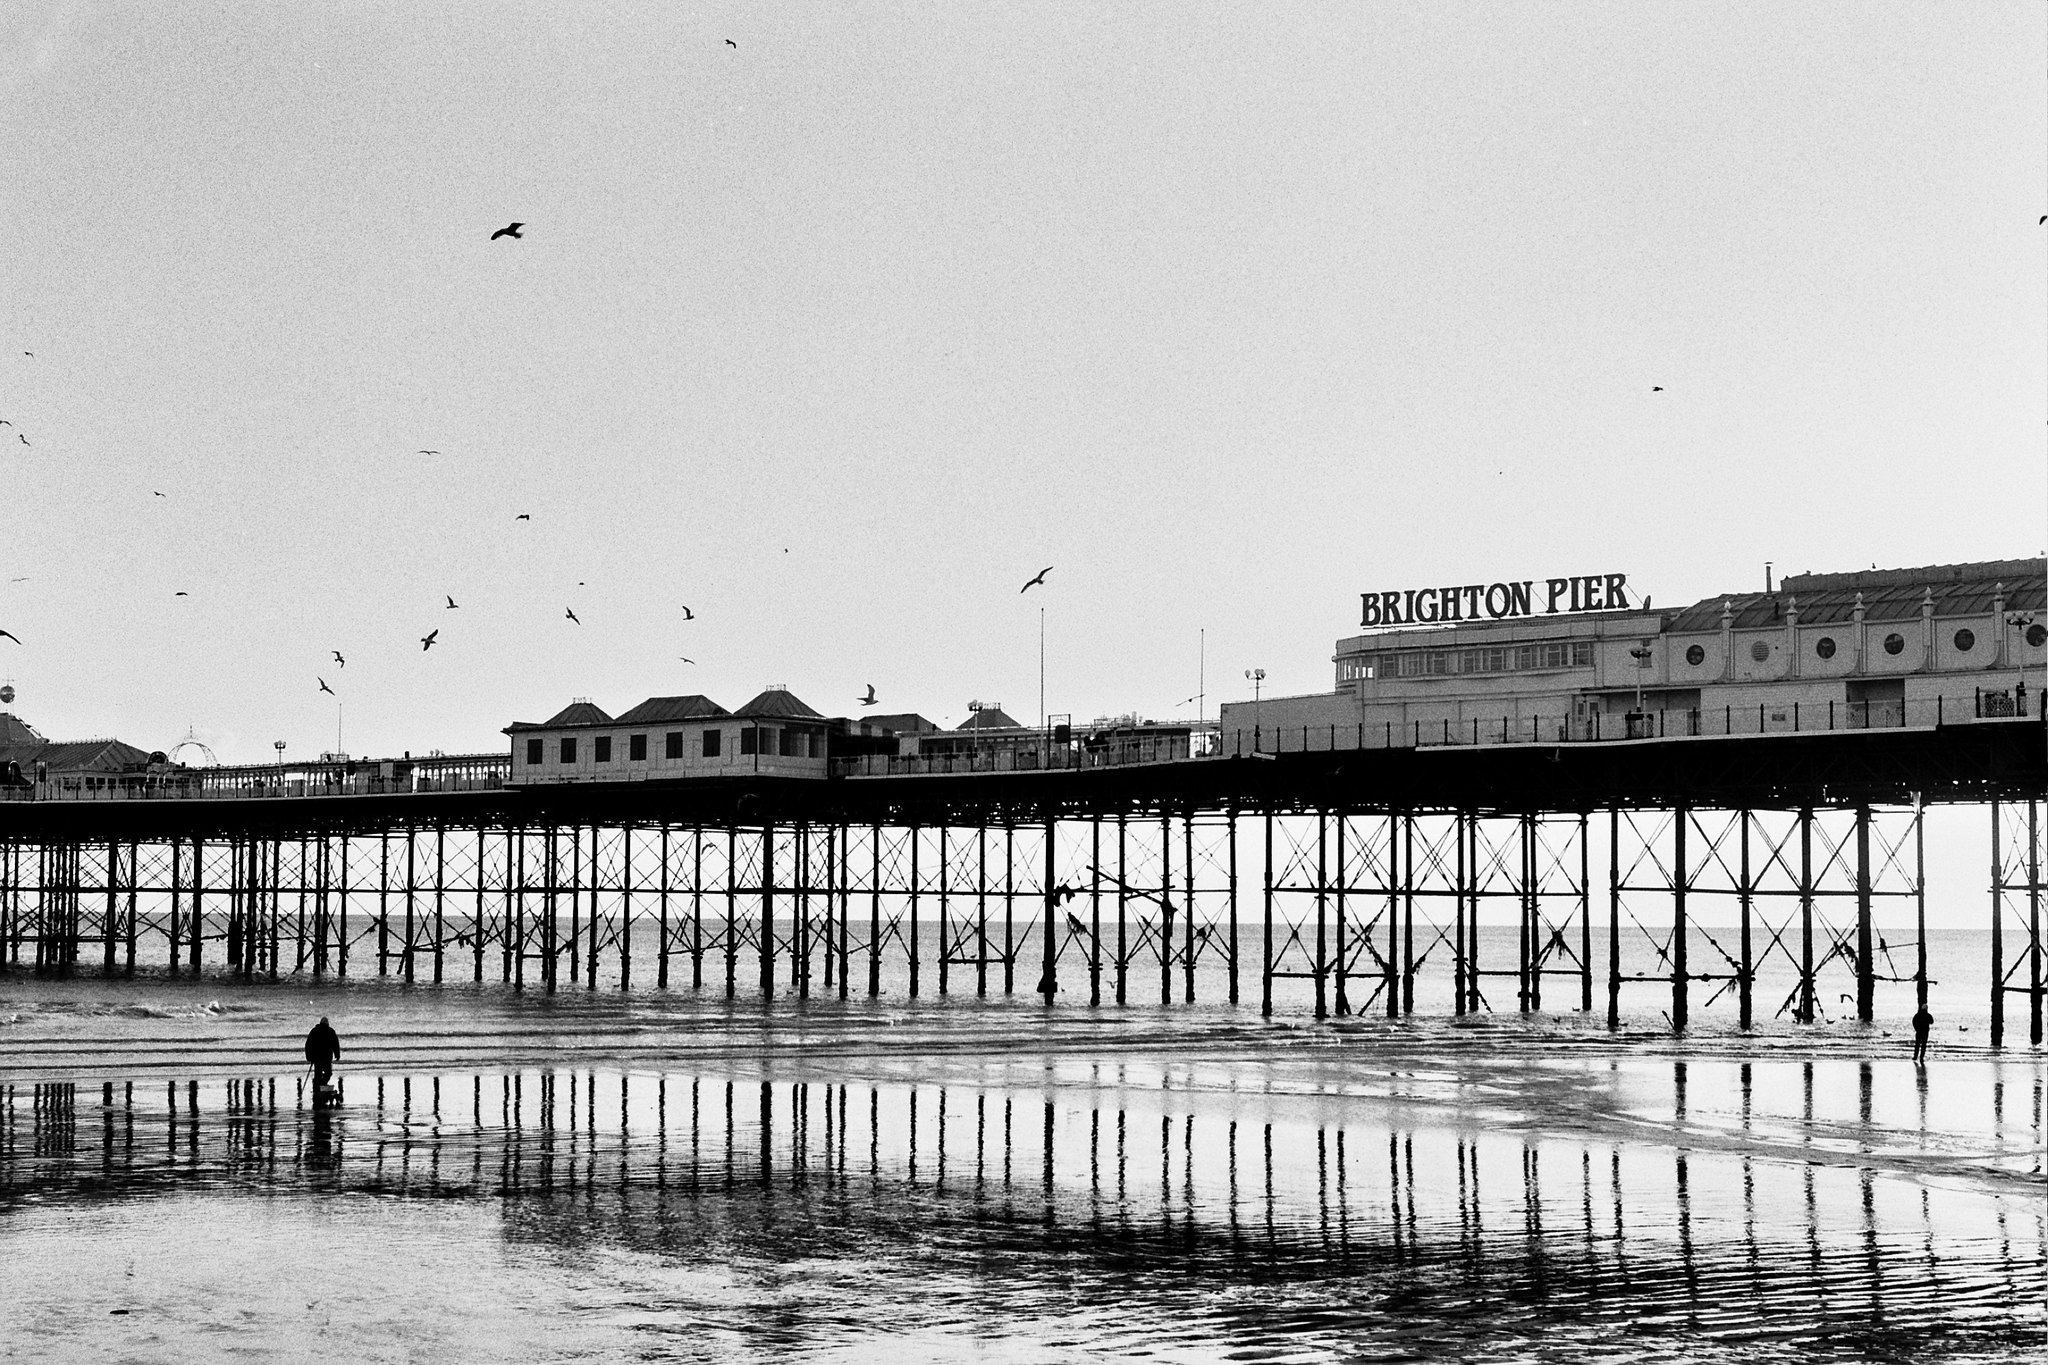 Photo Example of Ilford FP4 Plus